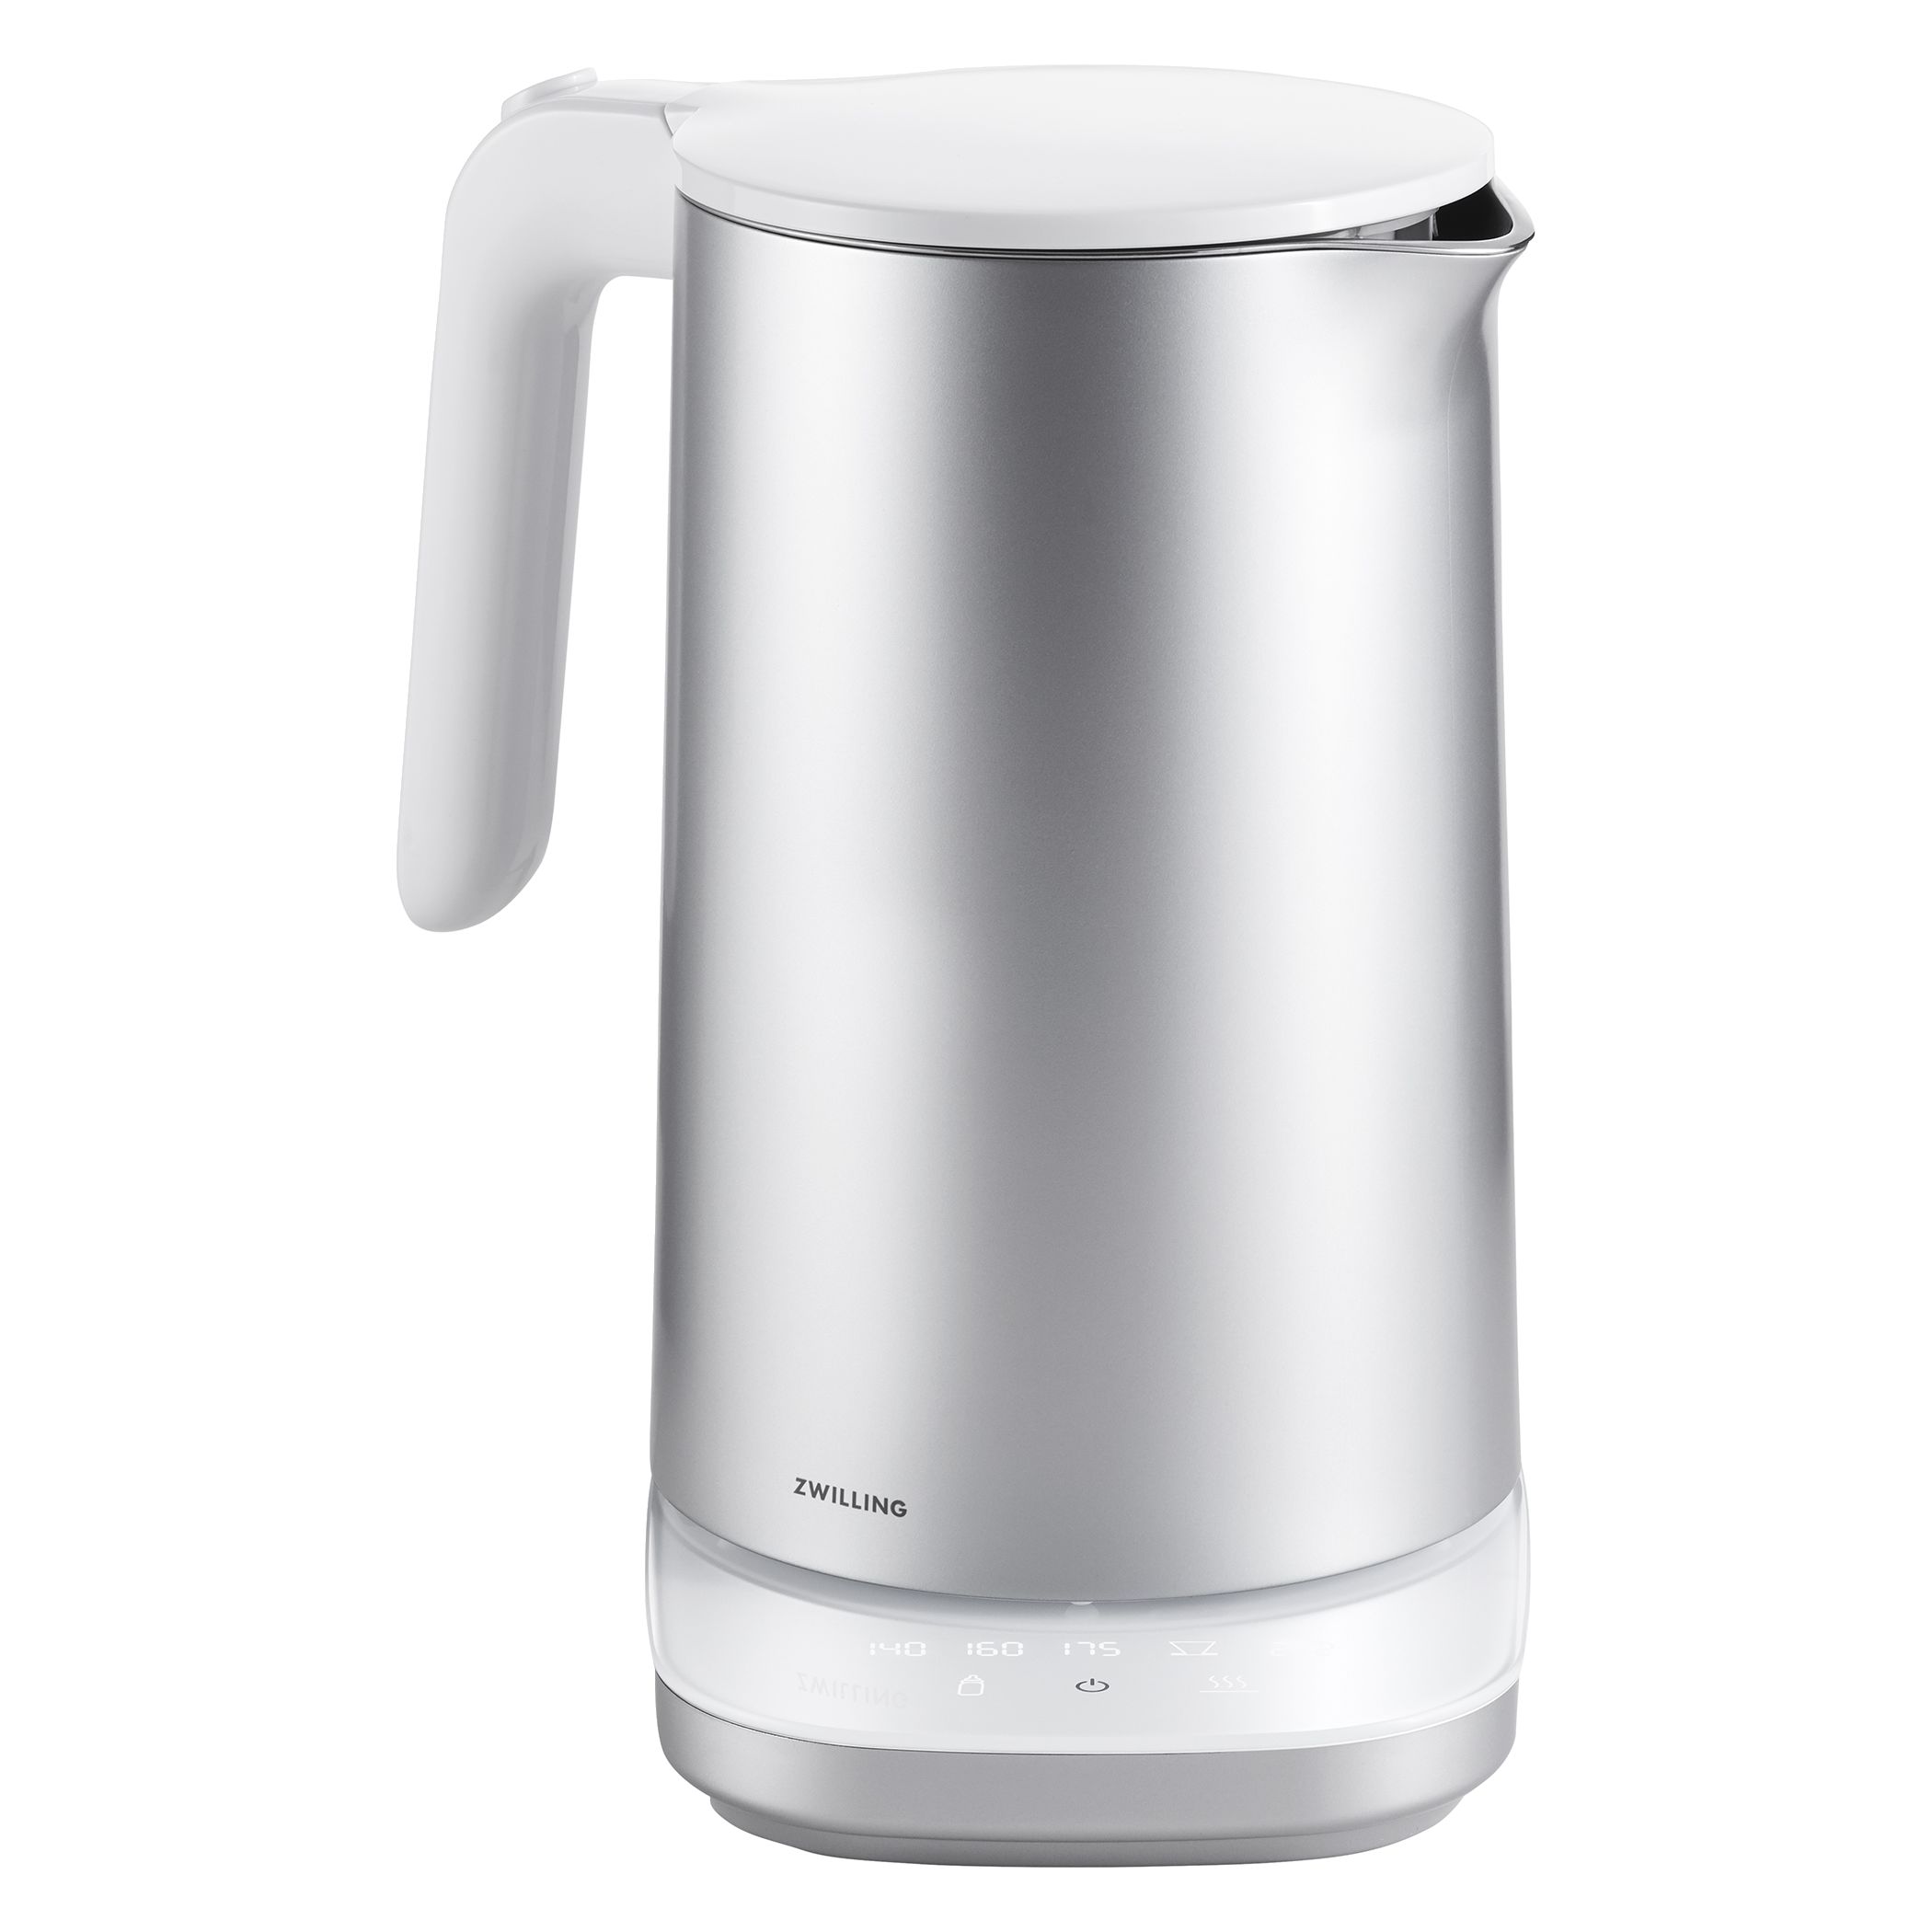 Cuisinart 1.7-Liter Stainless Steel Cordless Electric Kettle with 6 Preset  Temperatures (Brushed Graphite Gray)